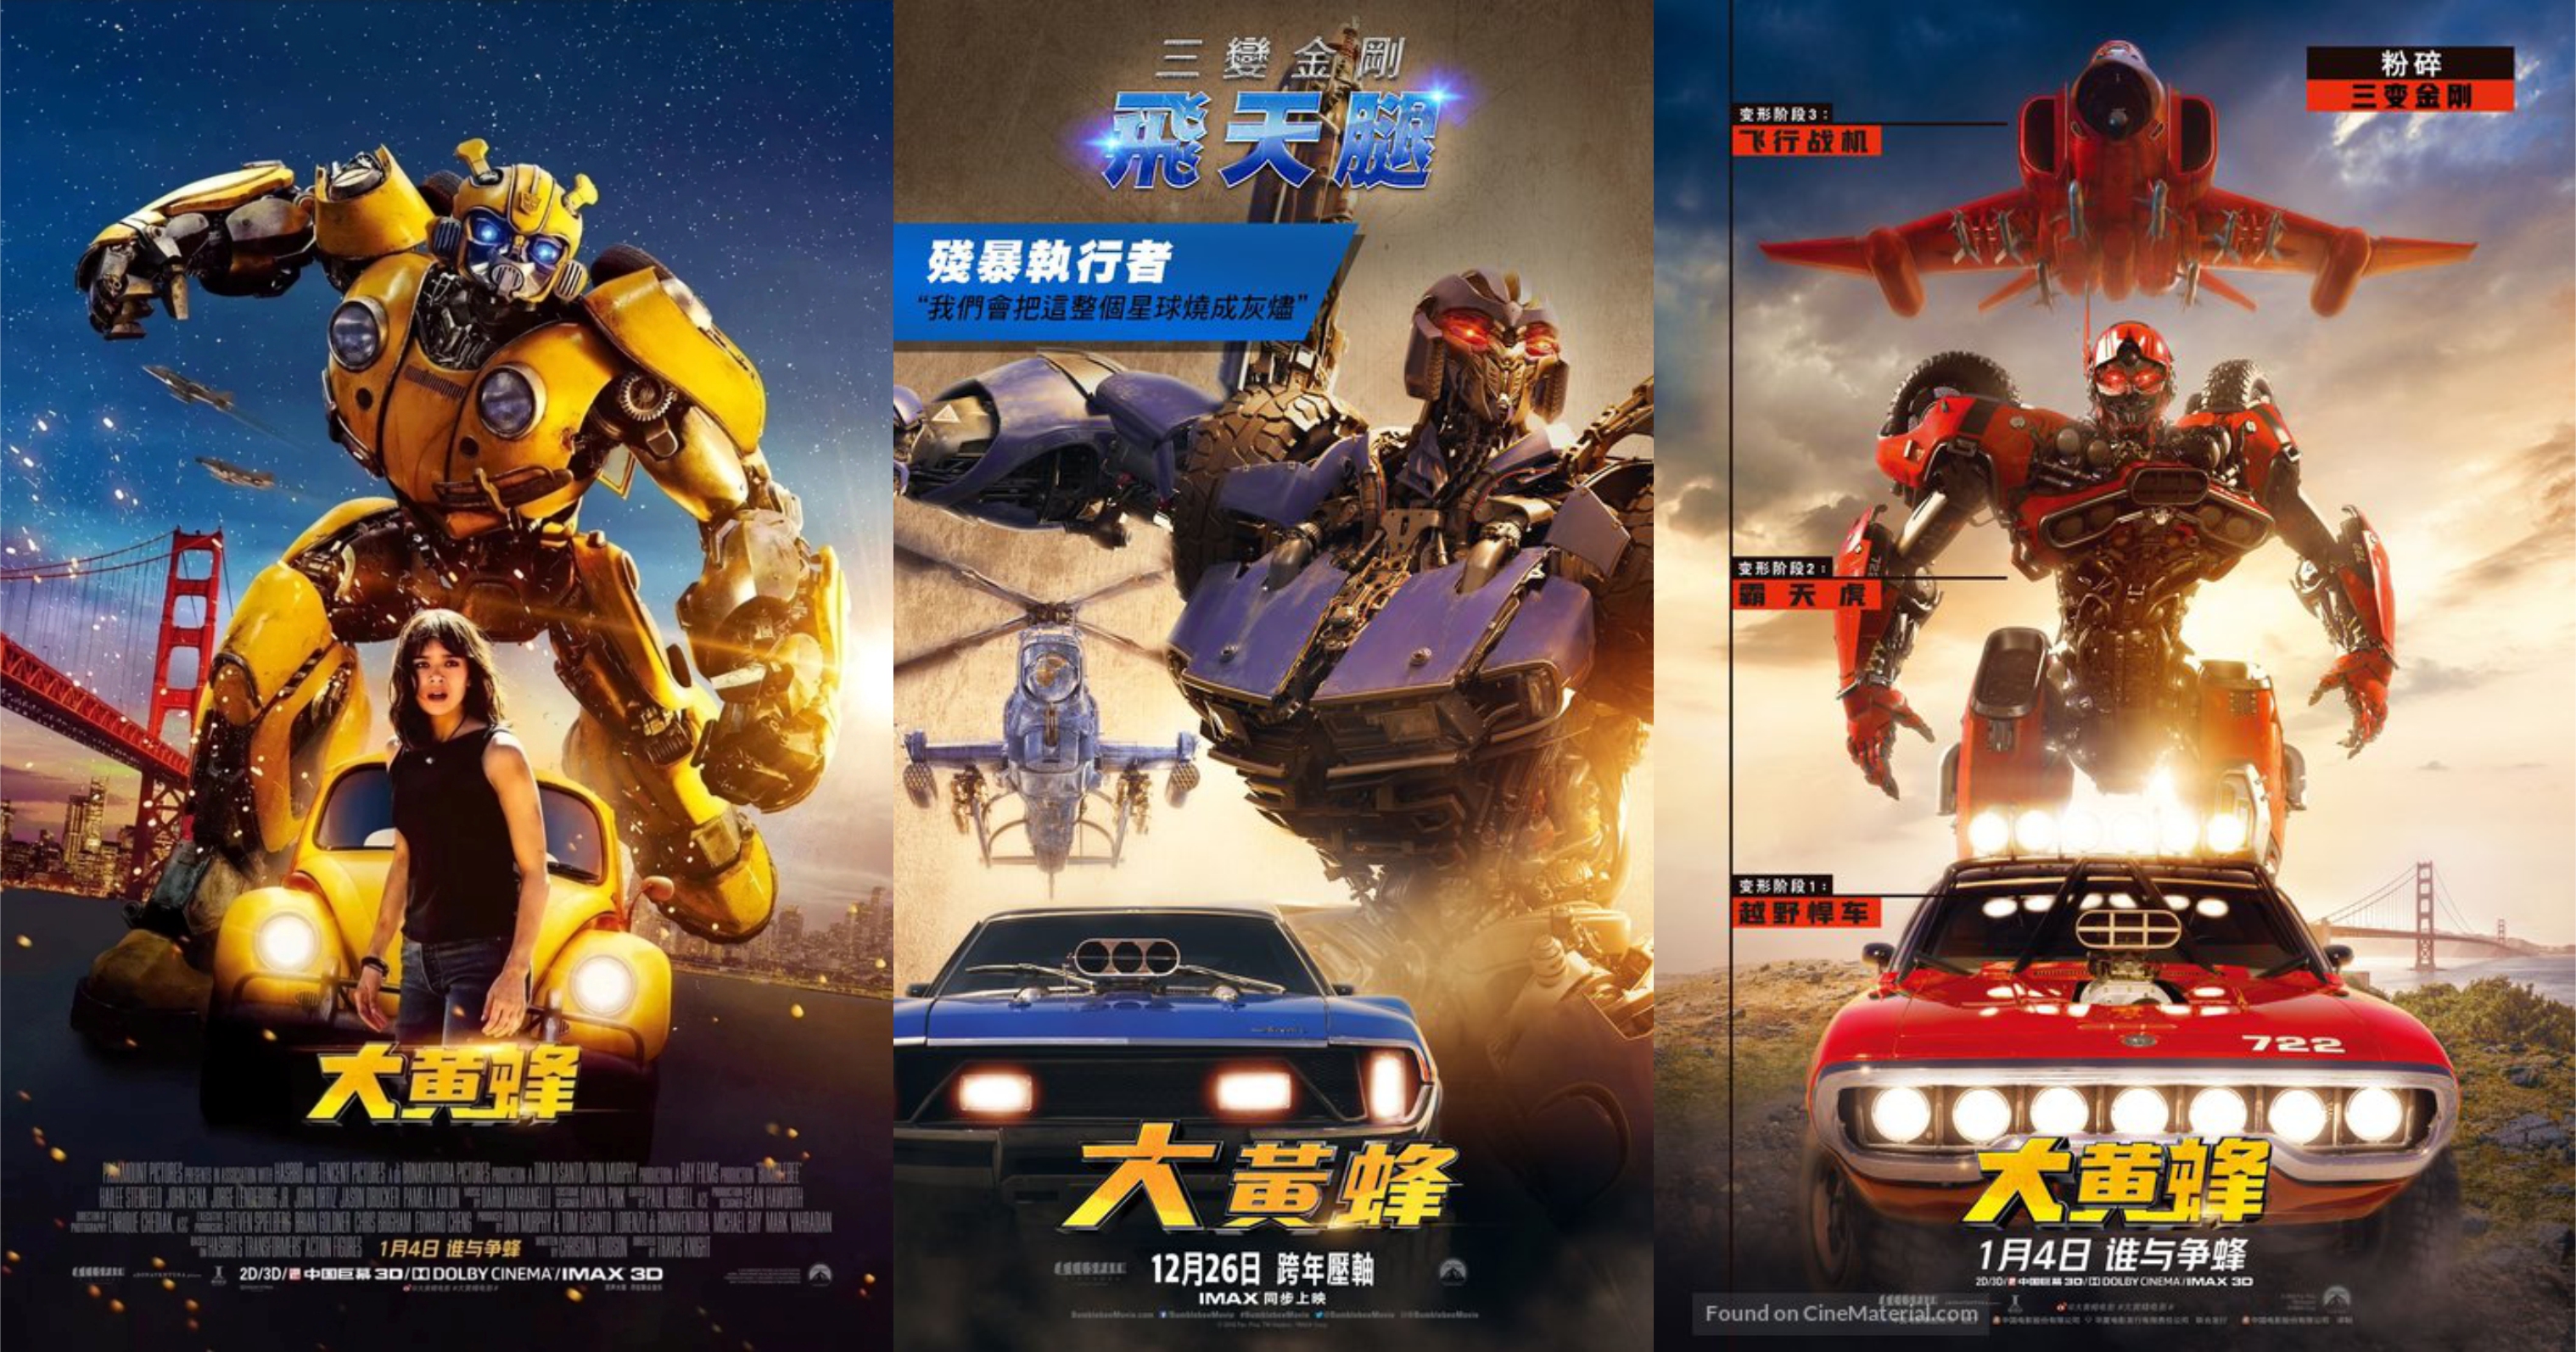 China pulls in major box office numbers for 